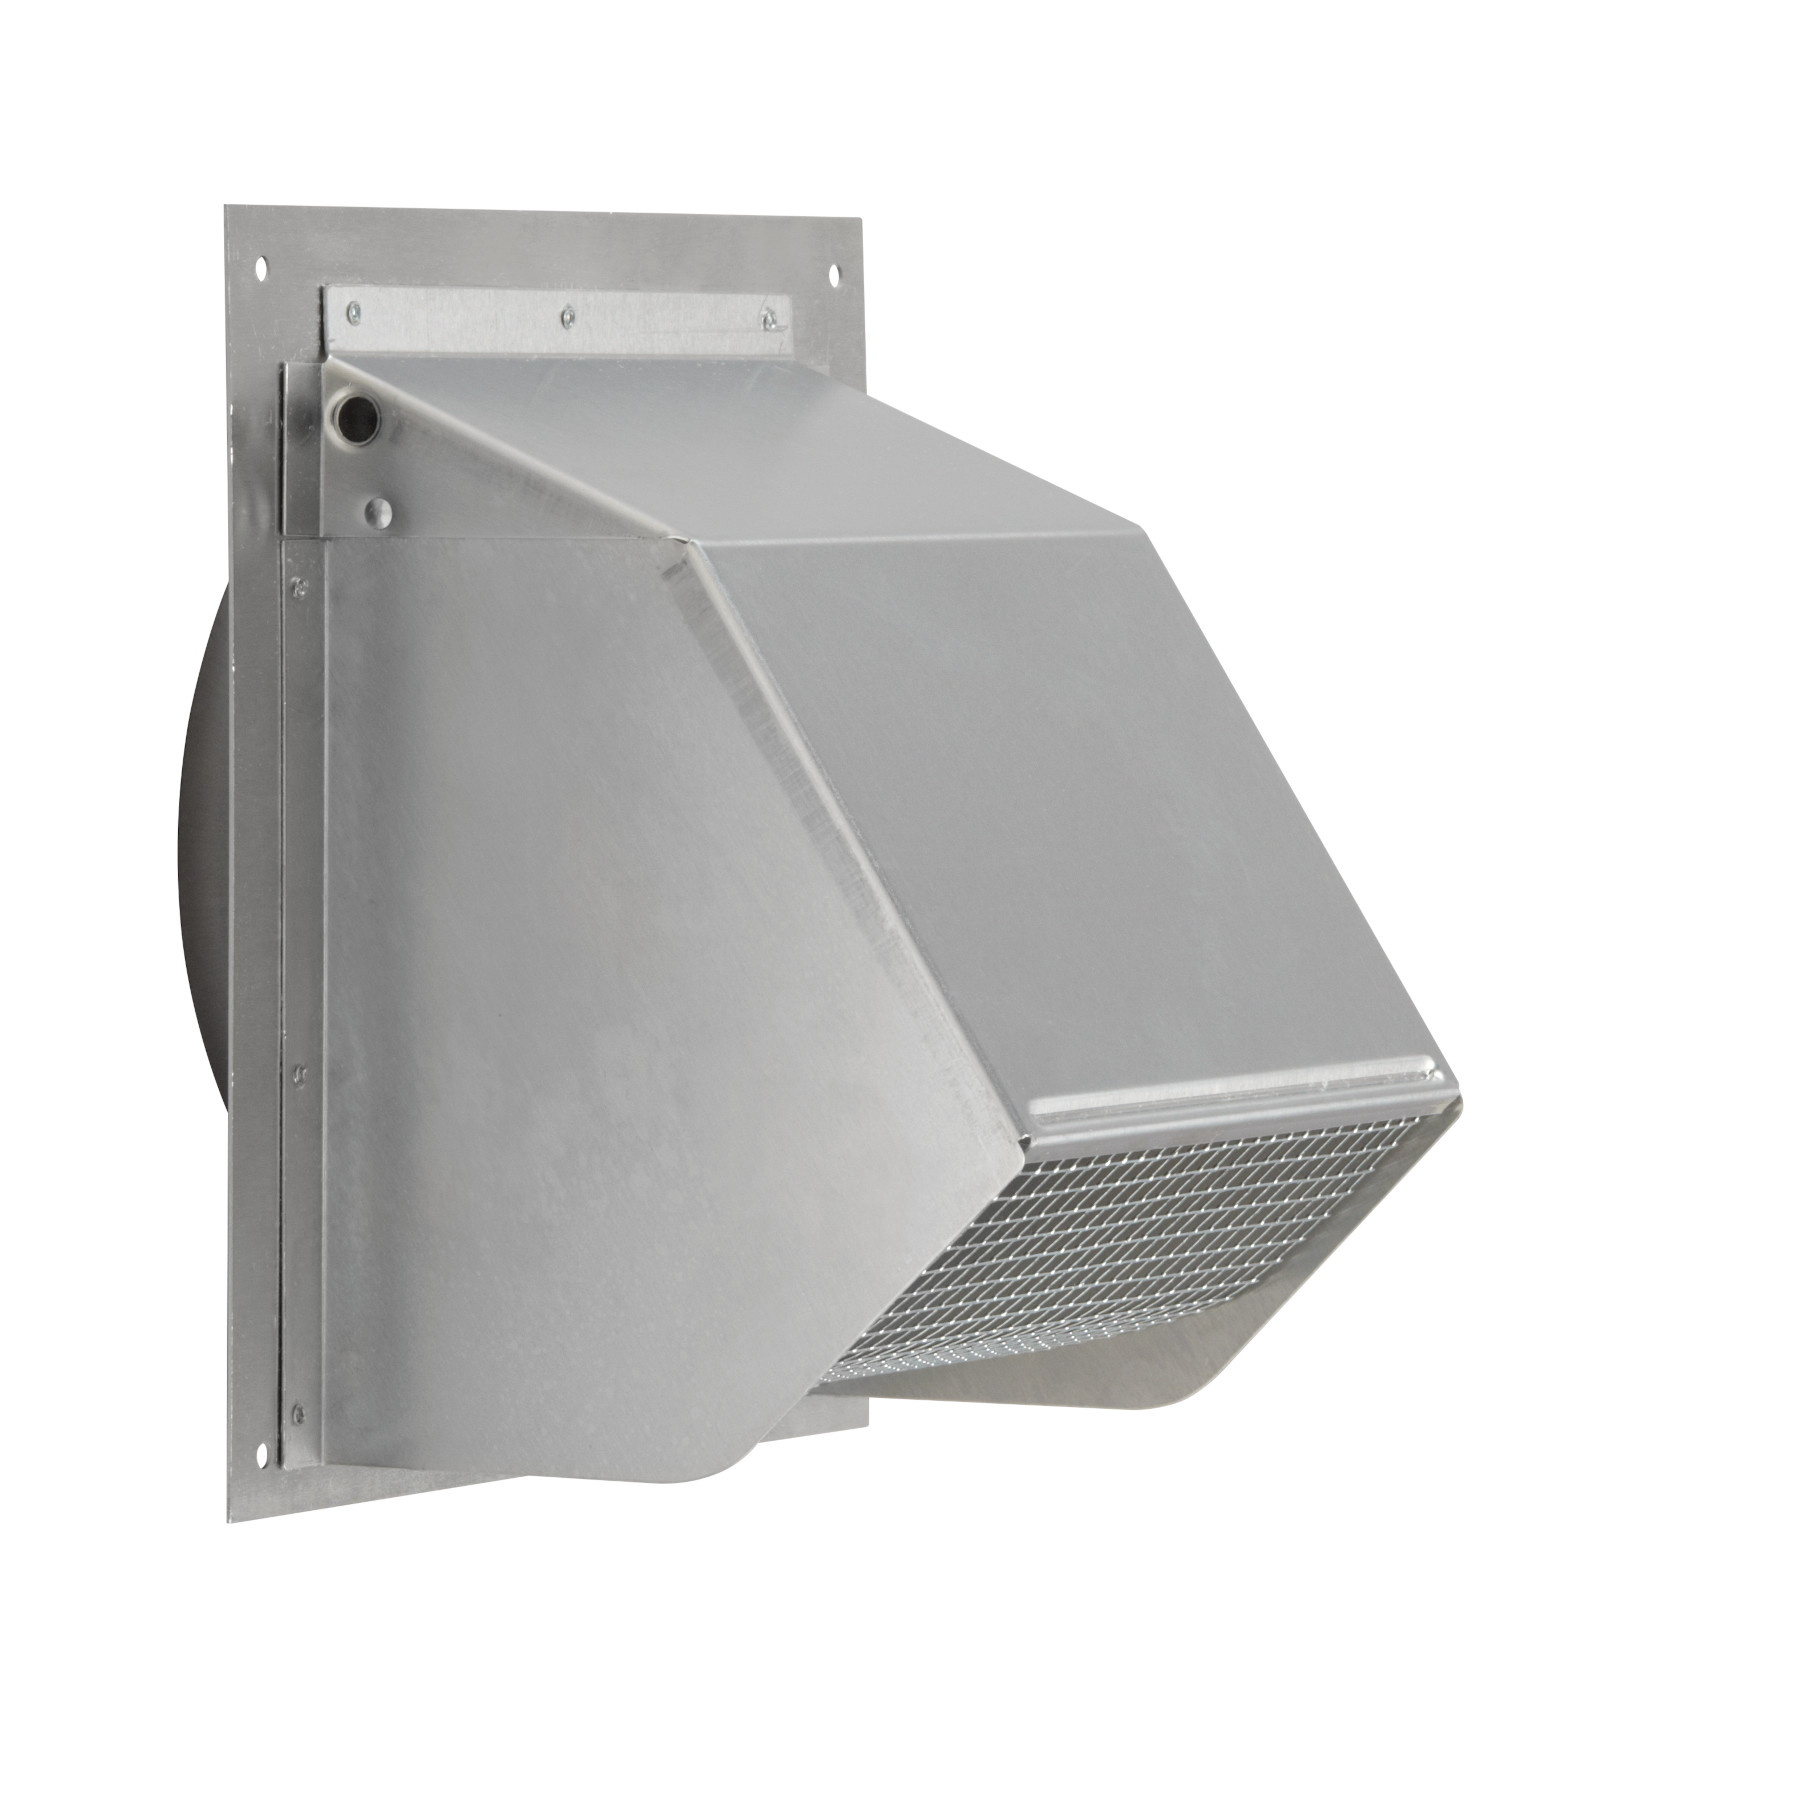 Fresh Air Inlet Wall Cap for 6" Round Duct for Range Hoods and Bath Ventilation Fans